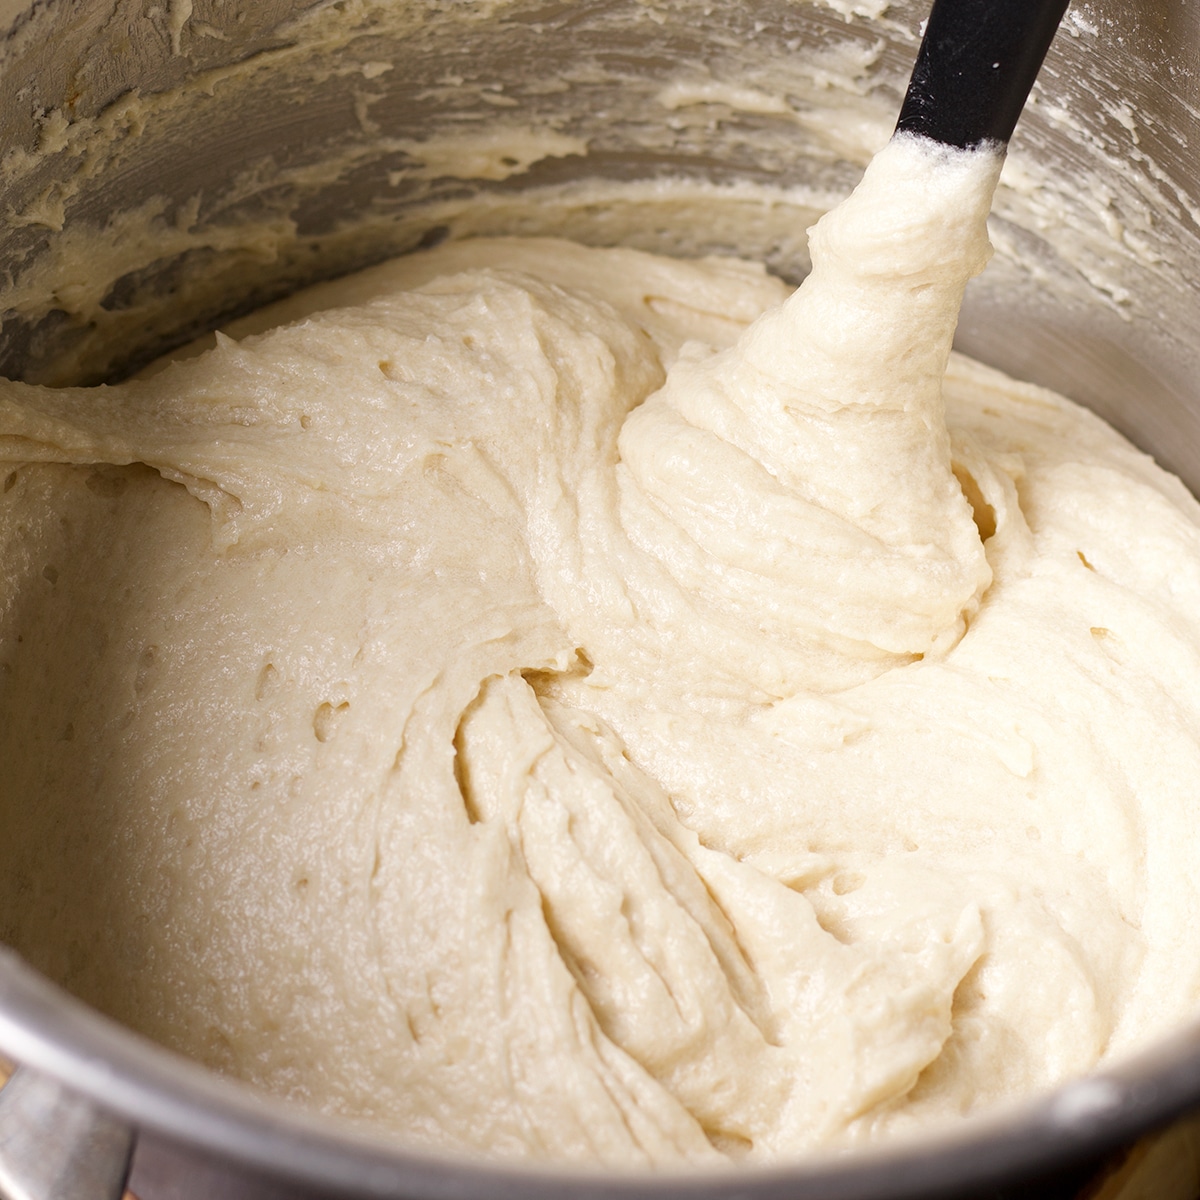 Someone using a rubber spatula to stir cake batter in a bowl.